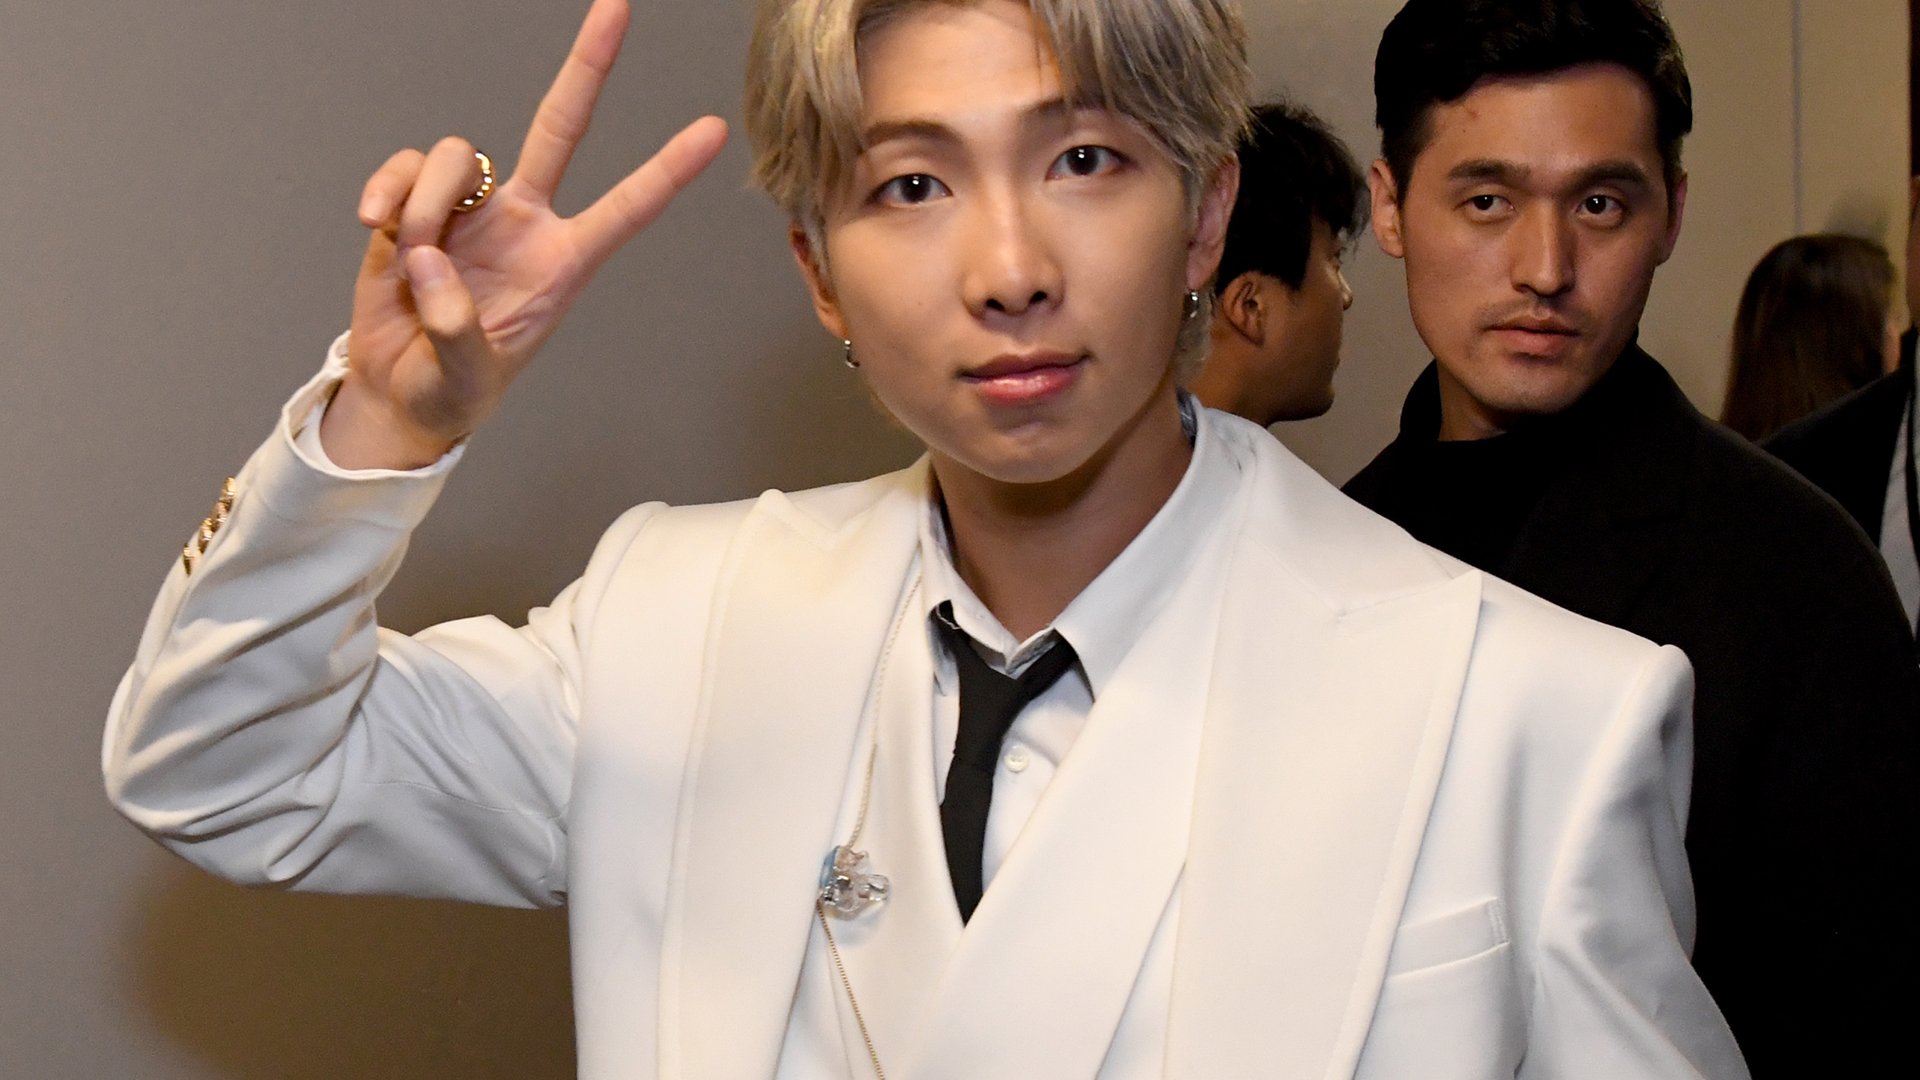 RM of BTS attends 102.7 KIIS FM's Jingle Ball 2019 Presented by Capital One at the Forum on December 6, 2019 in Los Angeles, California